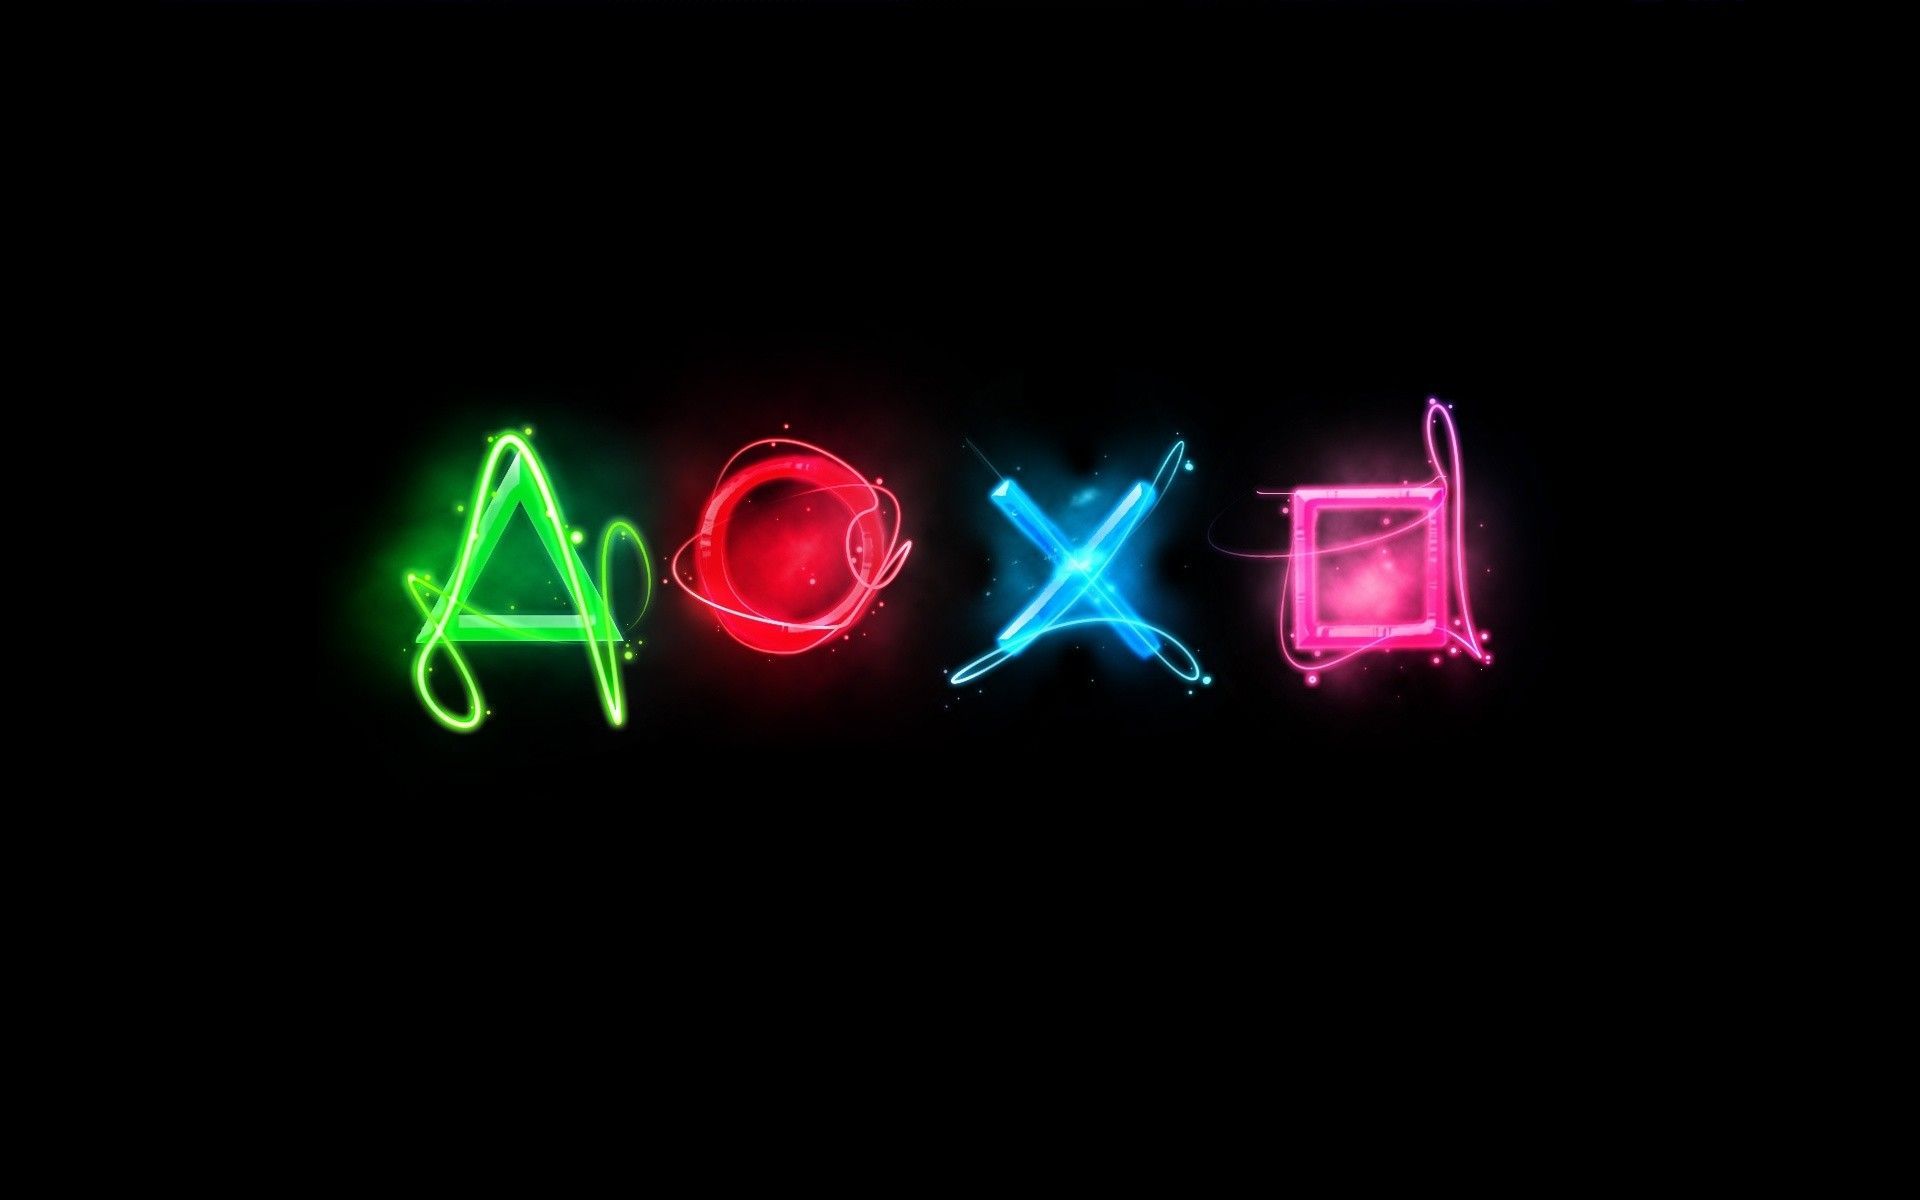 23.June.2018 1920x1200 px). Ps4 Background Wallpaper. Gaming wallpaper, Playstation tattoo, Computer video games